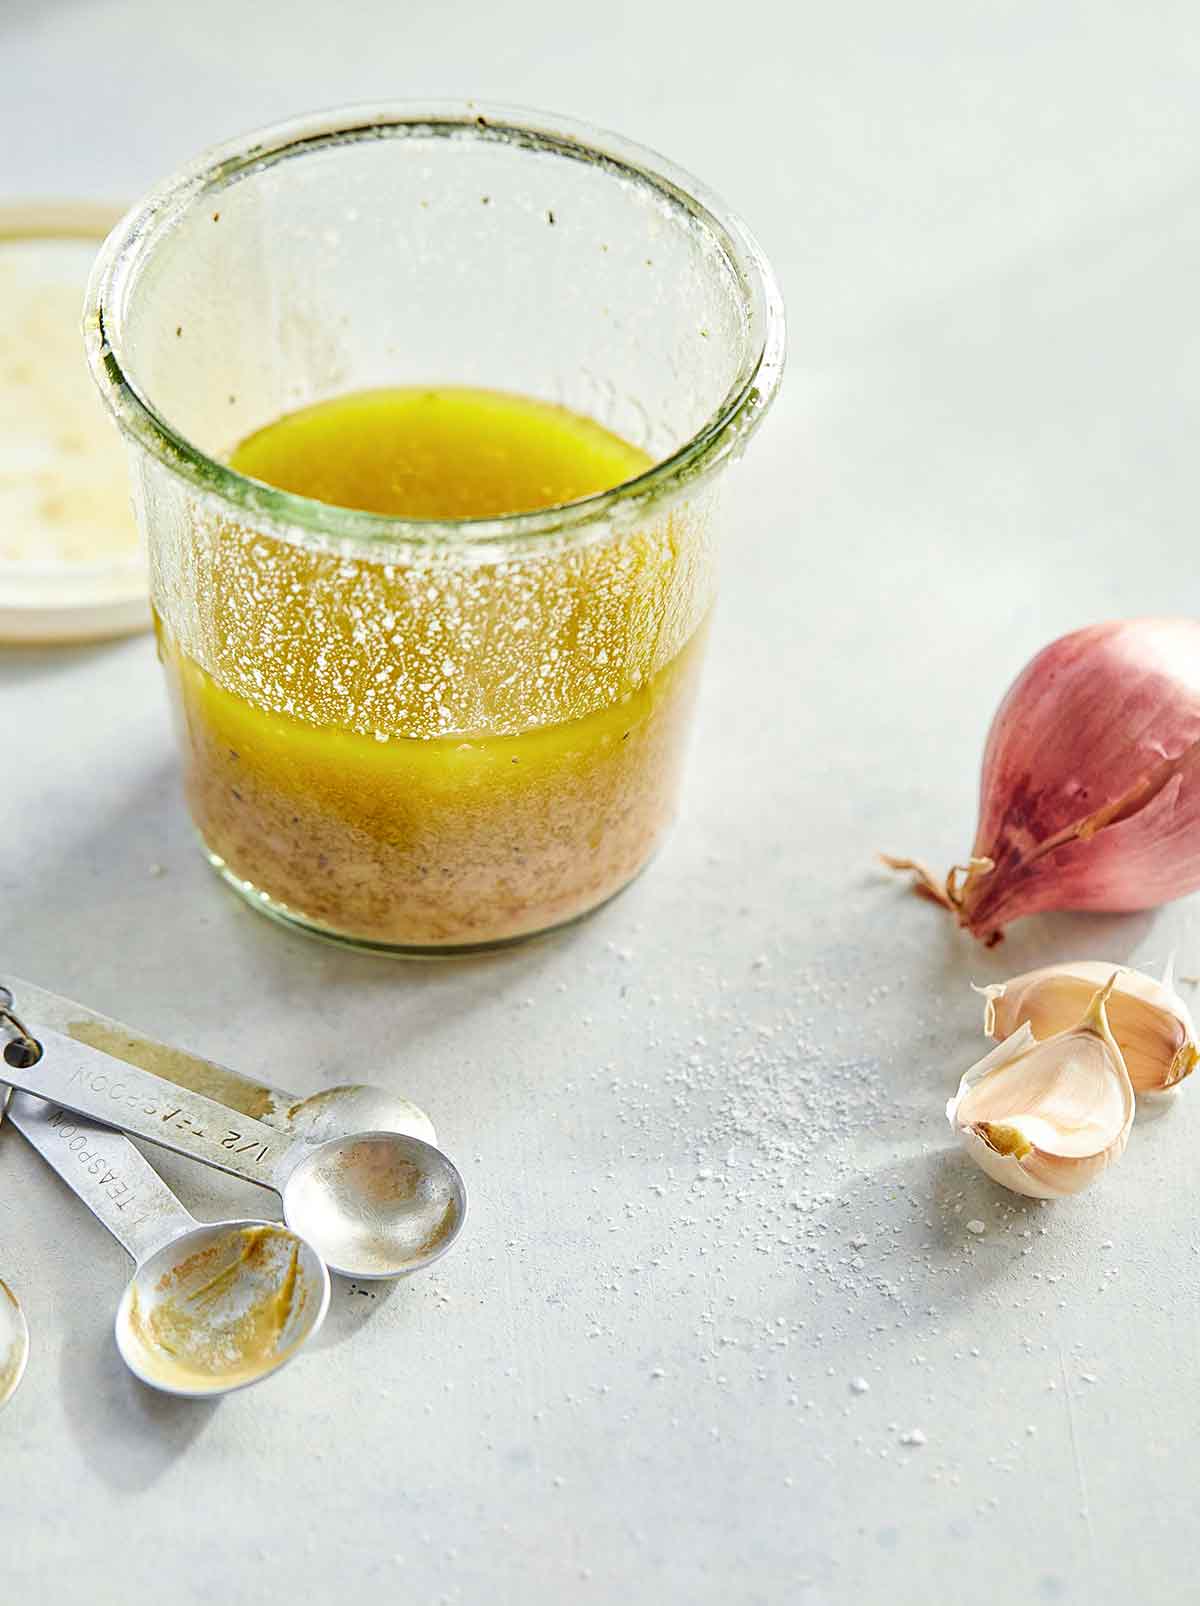 A glass jar half-filled with basic vinaigrette with measuring spoons, a shallot, and two garlic cloves on the side.